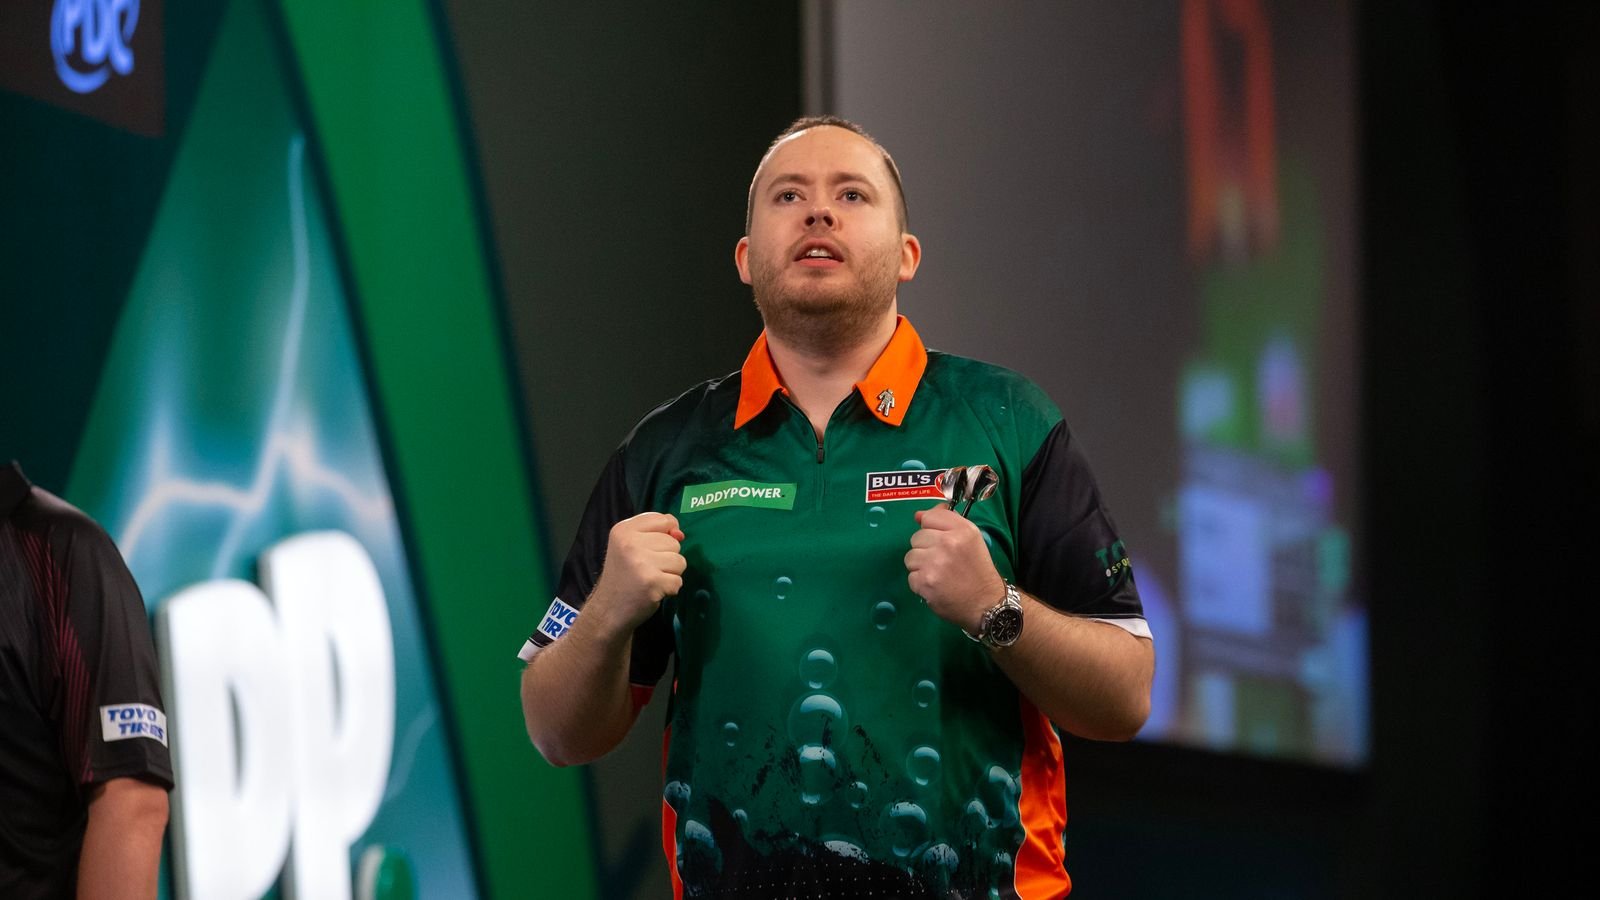 PDC Tour Cards: Steve Lennon and Martijn Dragt become first players to win tour places at Qualifying Schools | Darts News